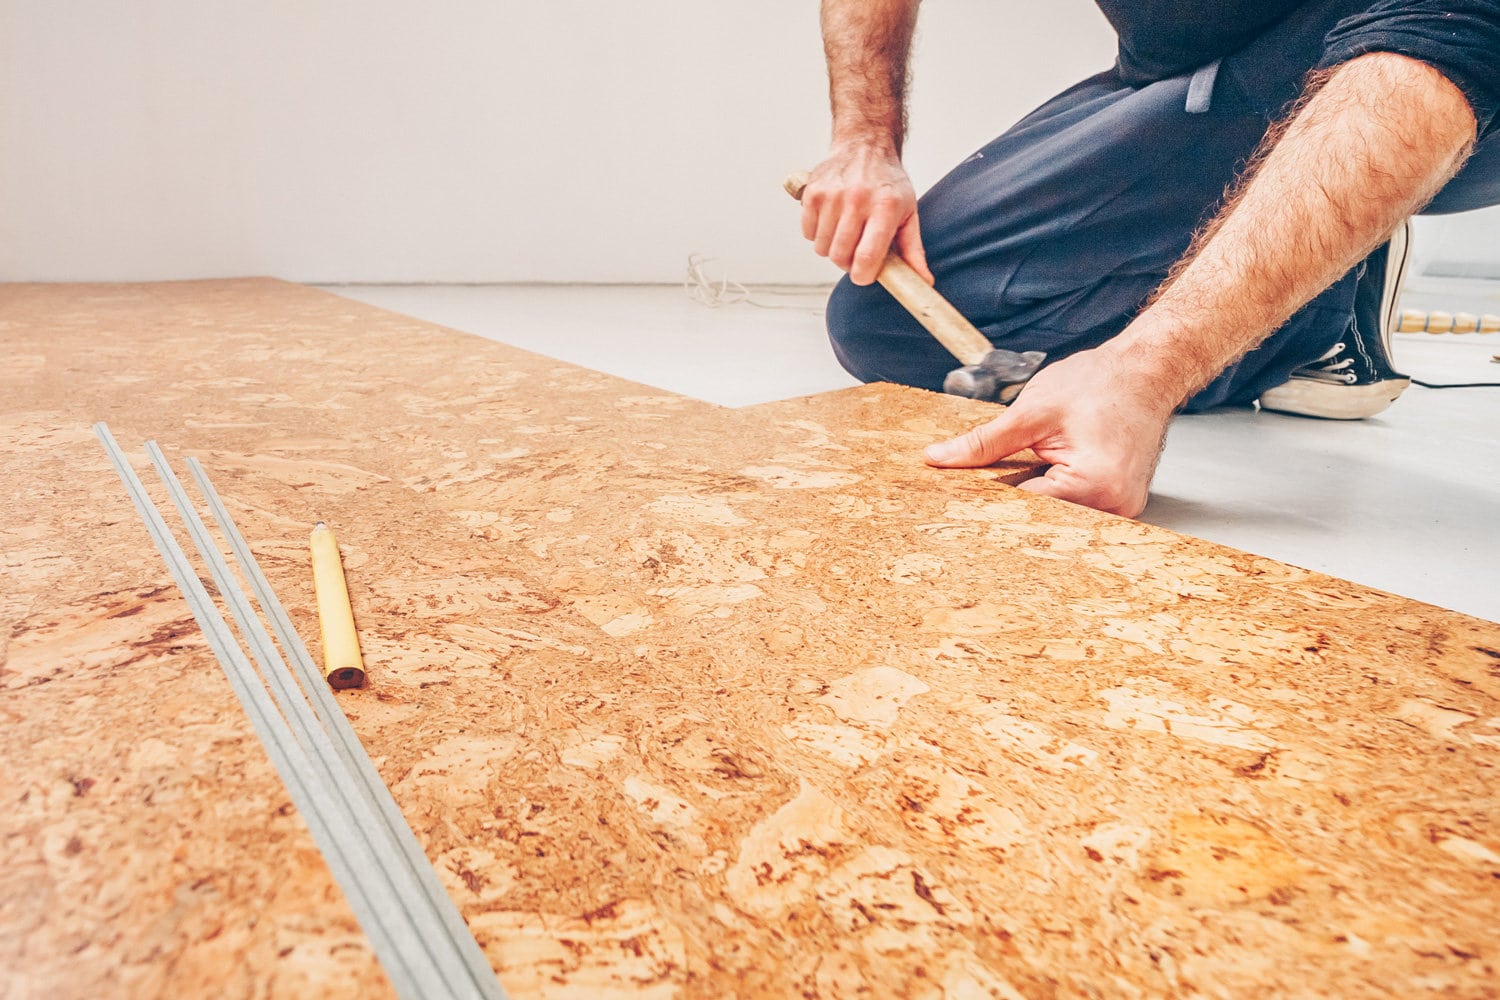 Master class for laying cork flooring, installation of a cork floor by a floating method, connection of a series of cork flooring 